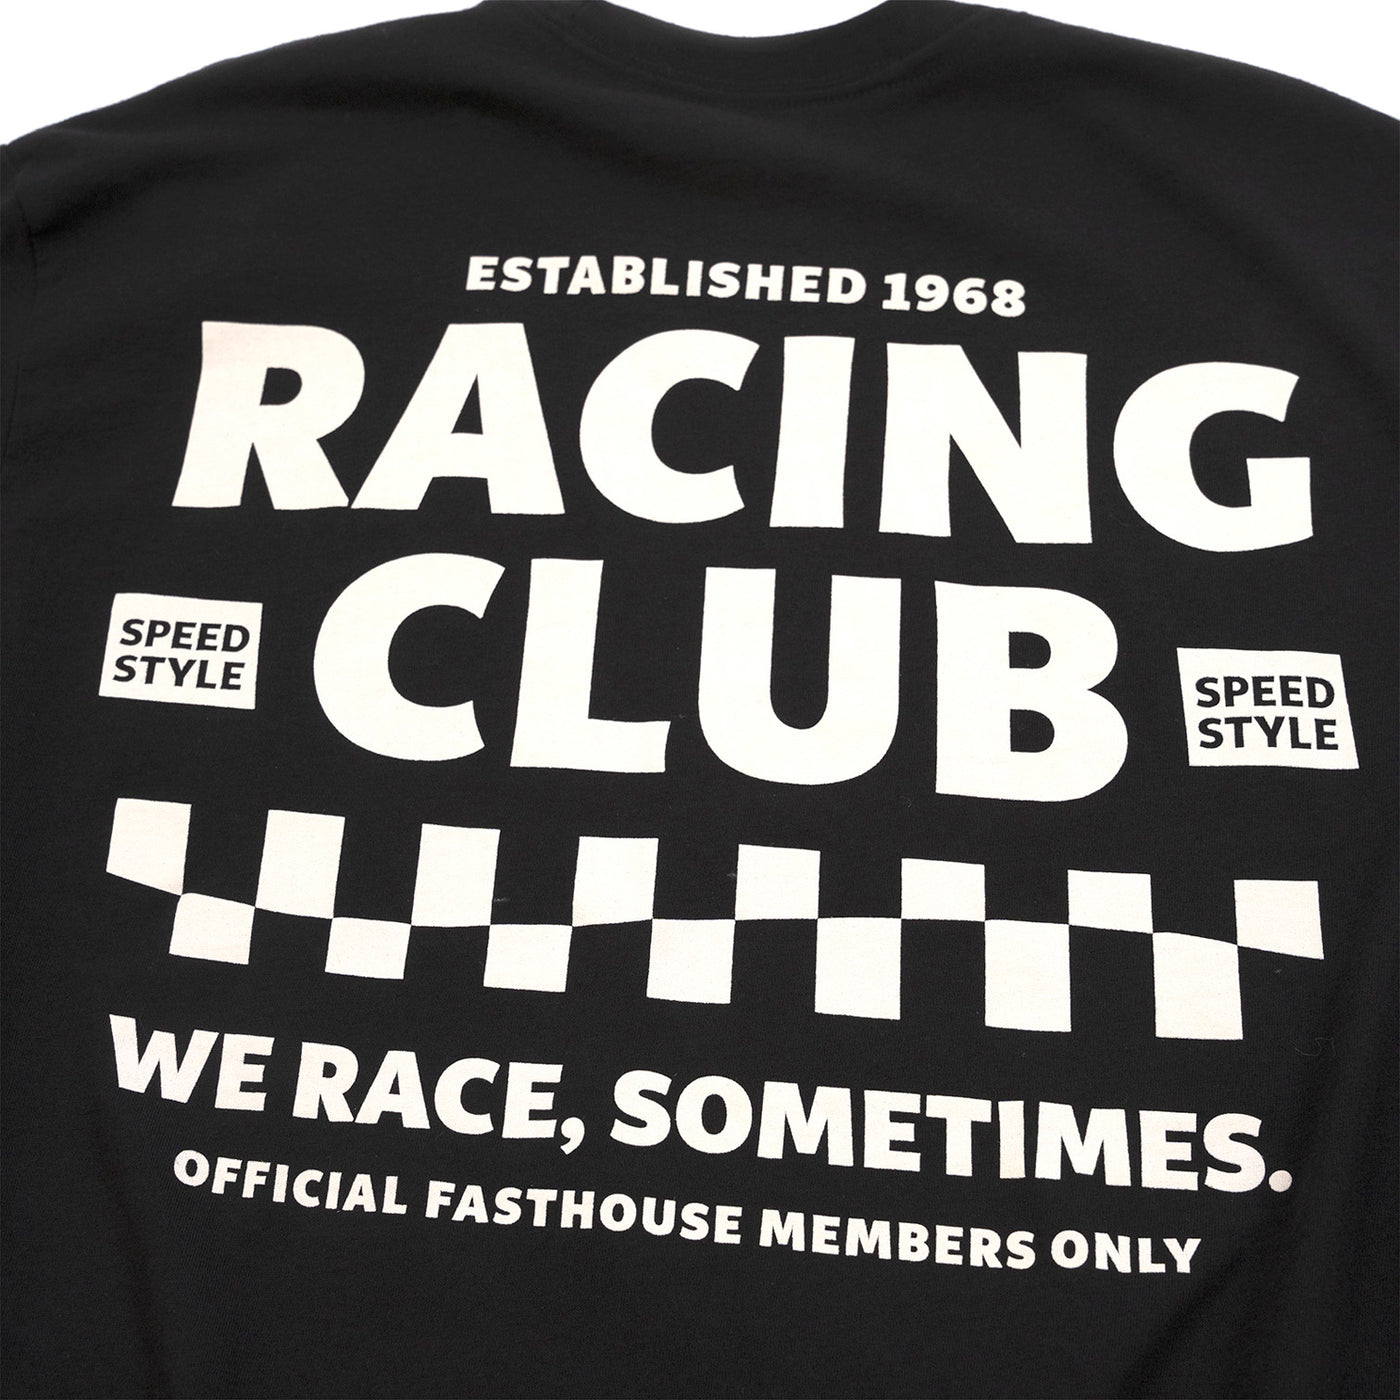 Fasthouse Members Only Tee